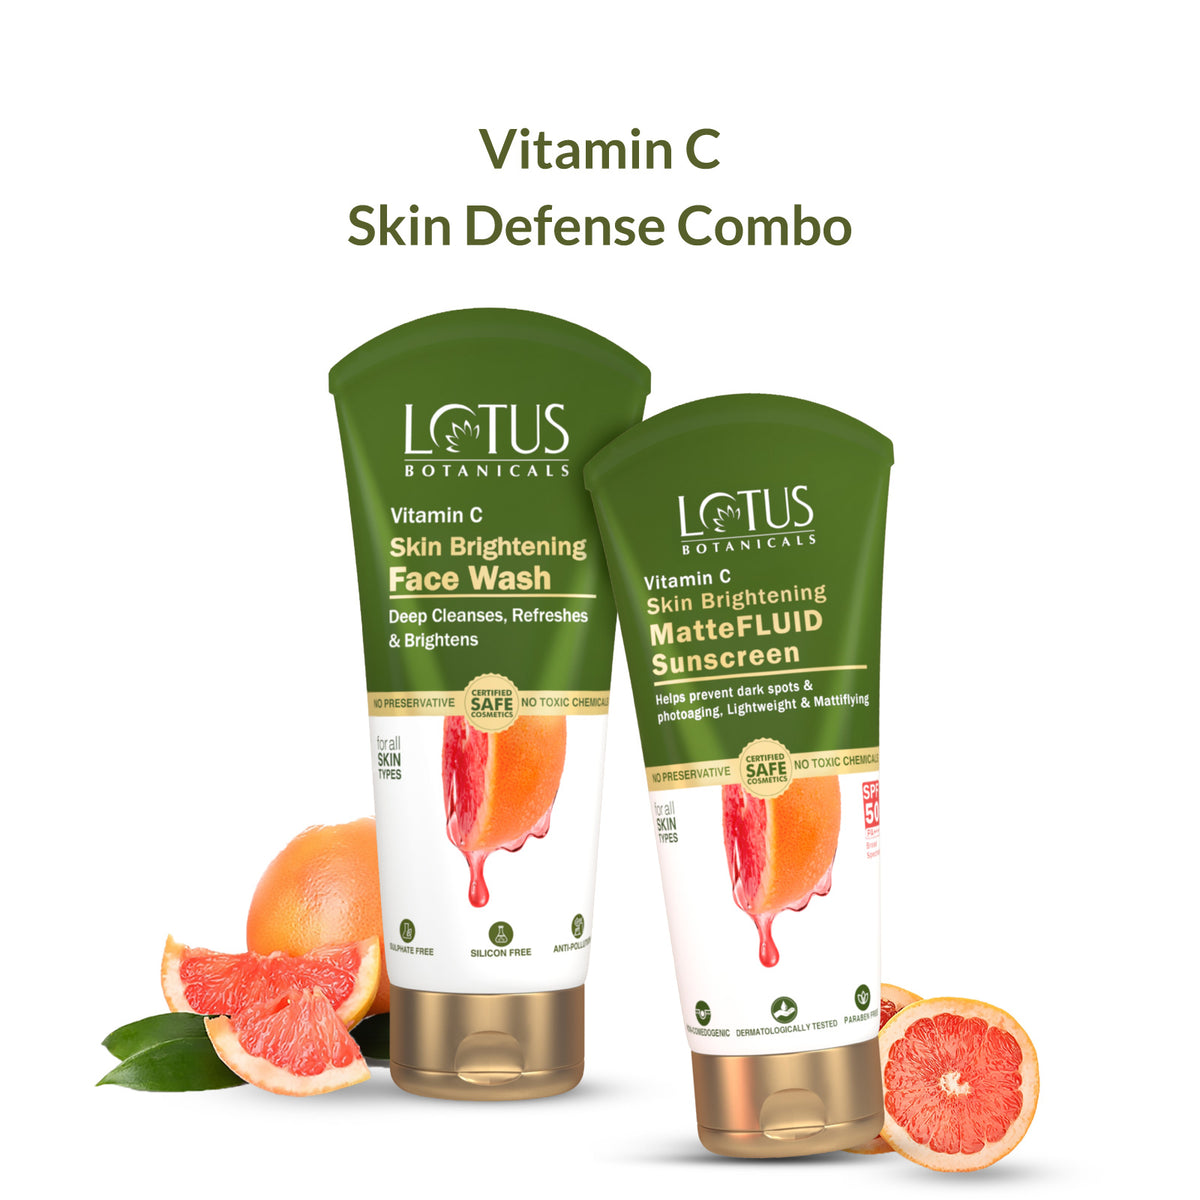 Vitamin C Skin Defense Combo - Protect and nourish your skin with this powerful antioxidant blend